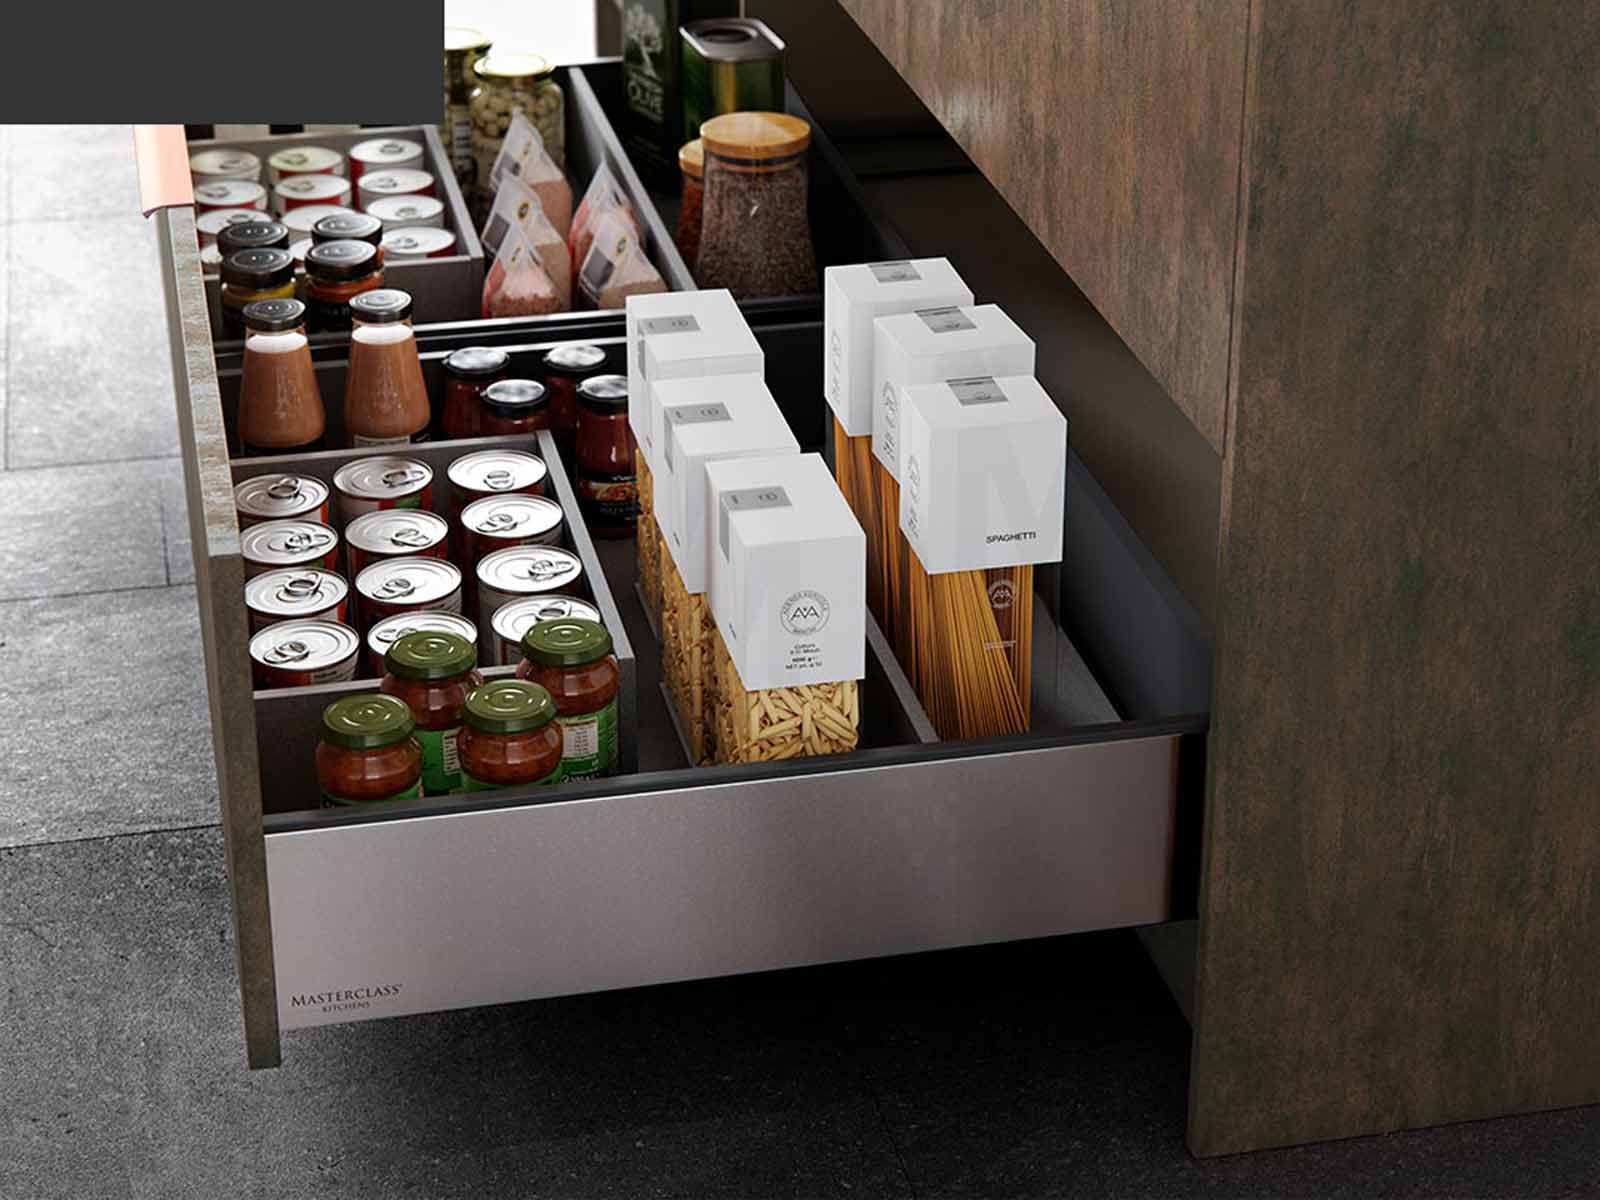 Deep, wide and strong kitchen drawers that enable ample room for organisation